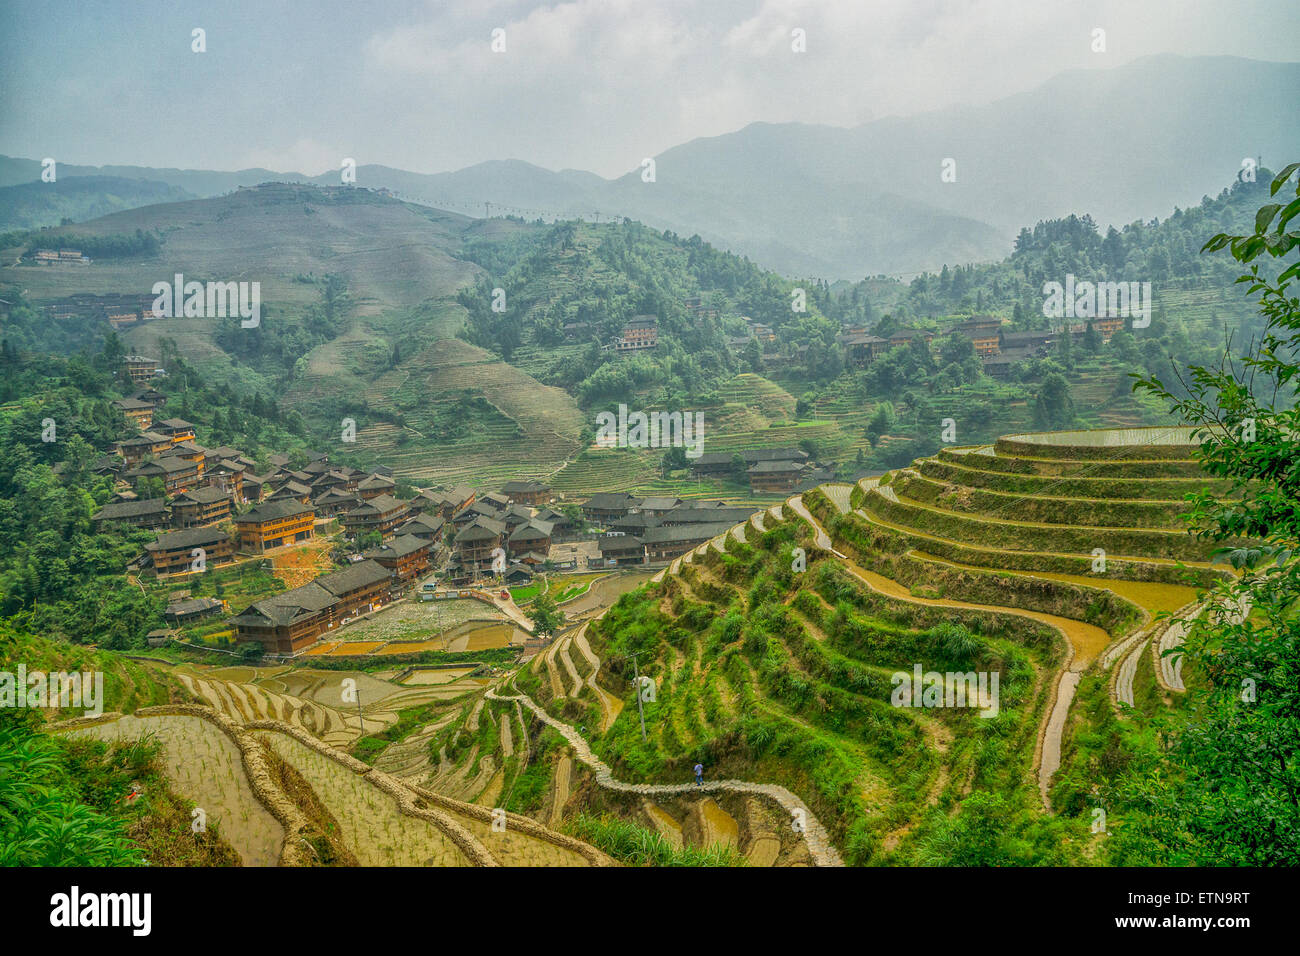 Rice terraces and wooden houses, Guilin, China Stock Photo